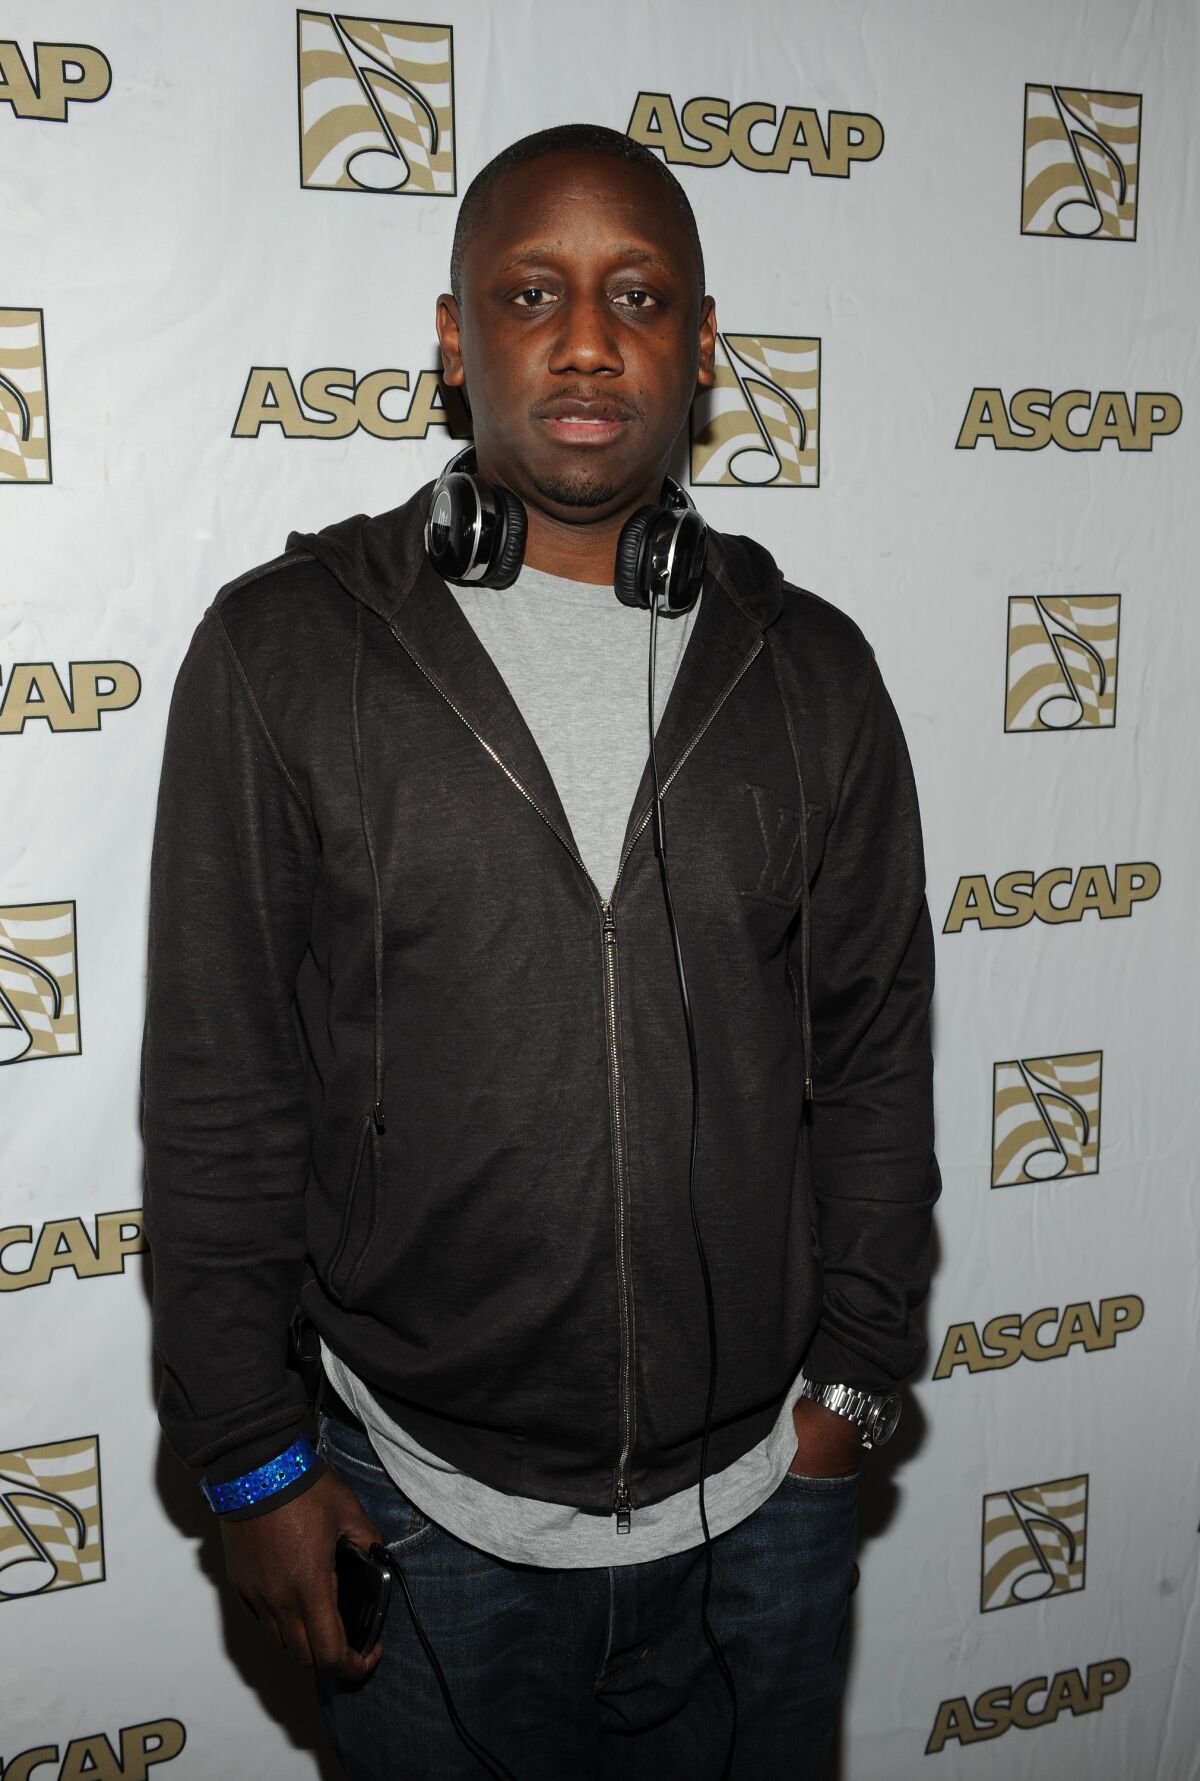 A man in a dark hoodie poses with headphones draped around his neck